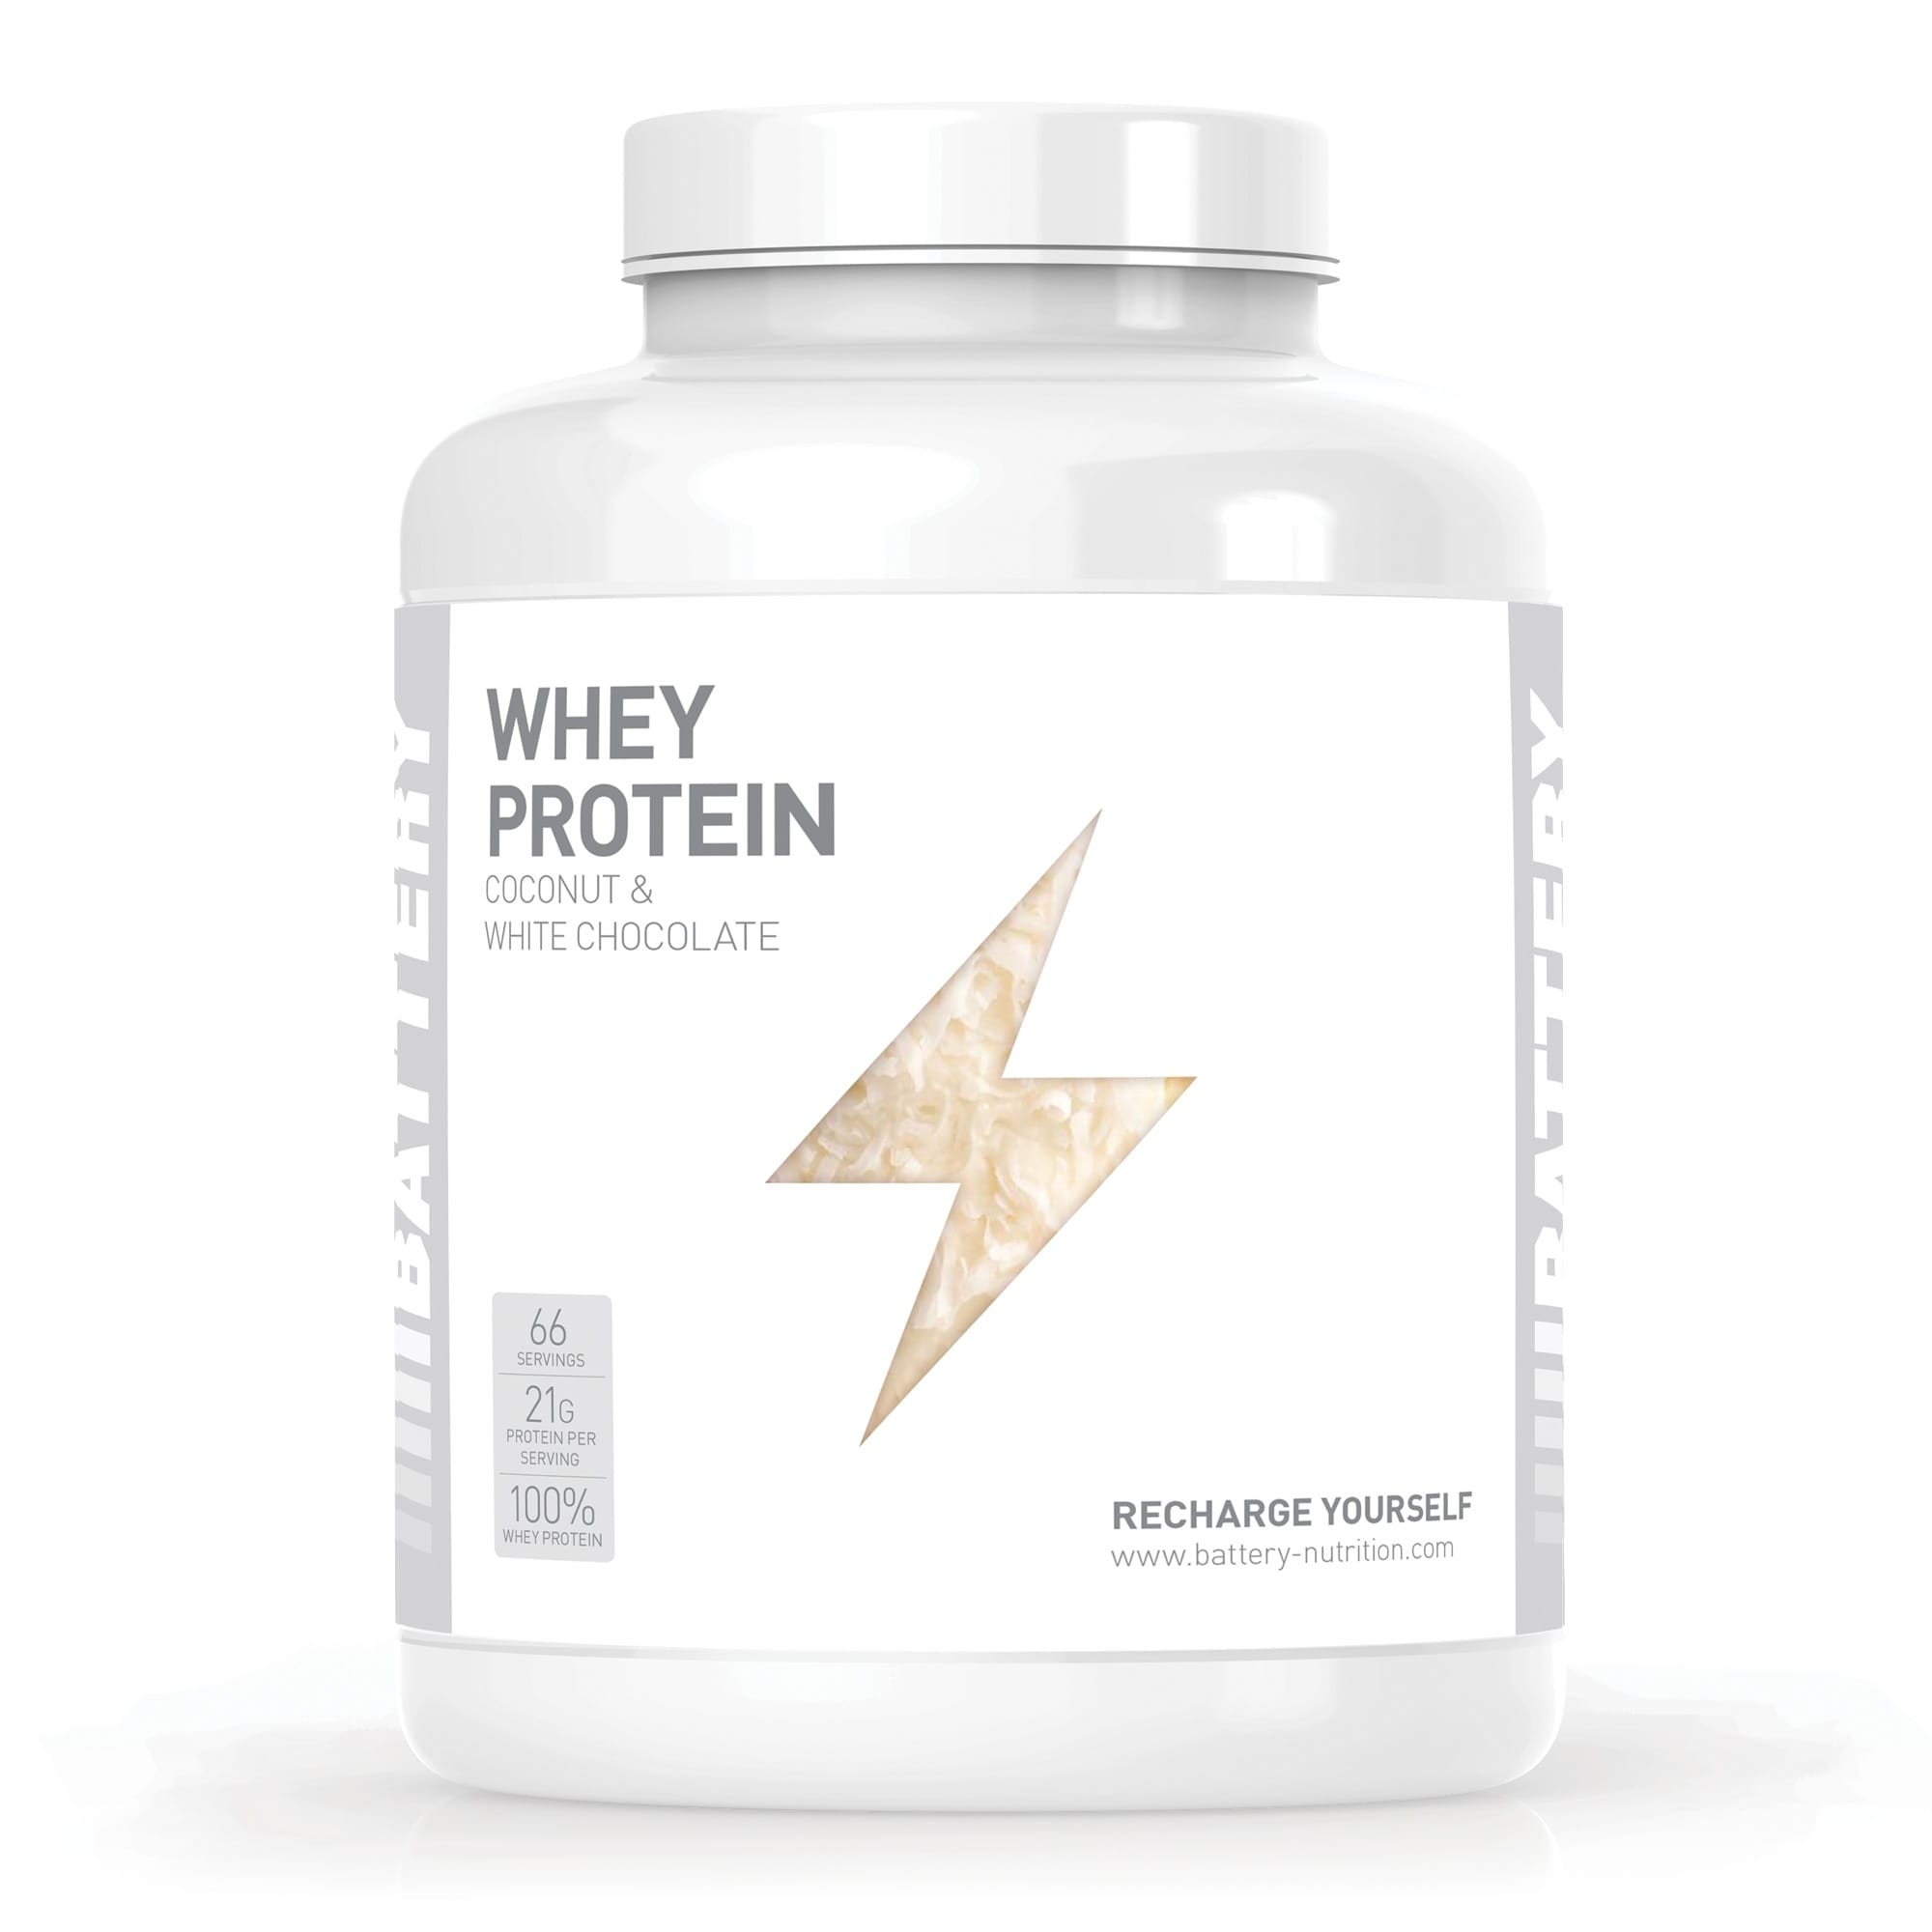 Battery Whey Protein